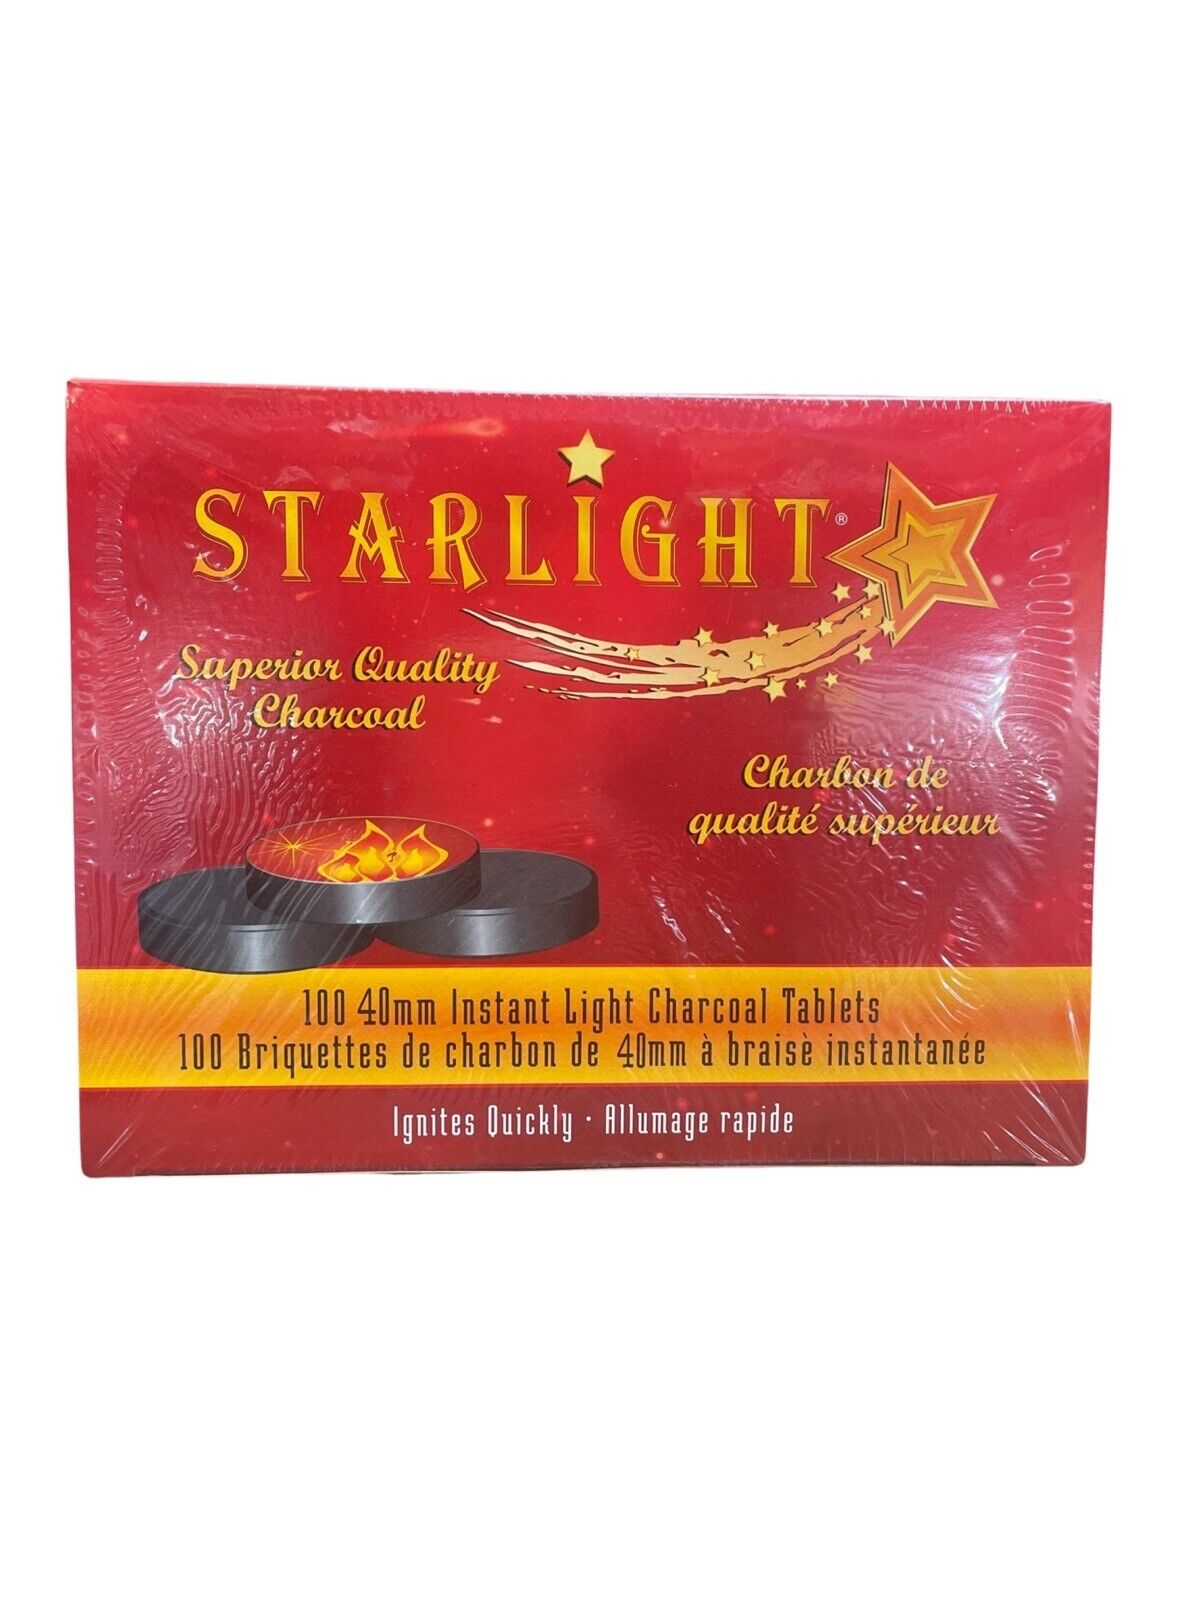 STARLIGHT Charcoal 40mm Instant Charcoal Tablet 100 Count